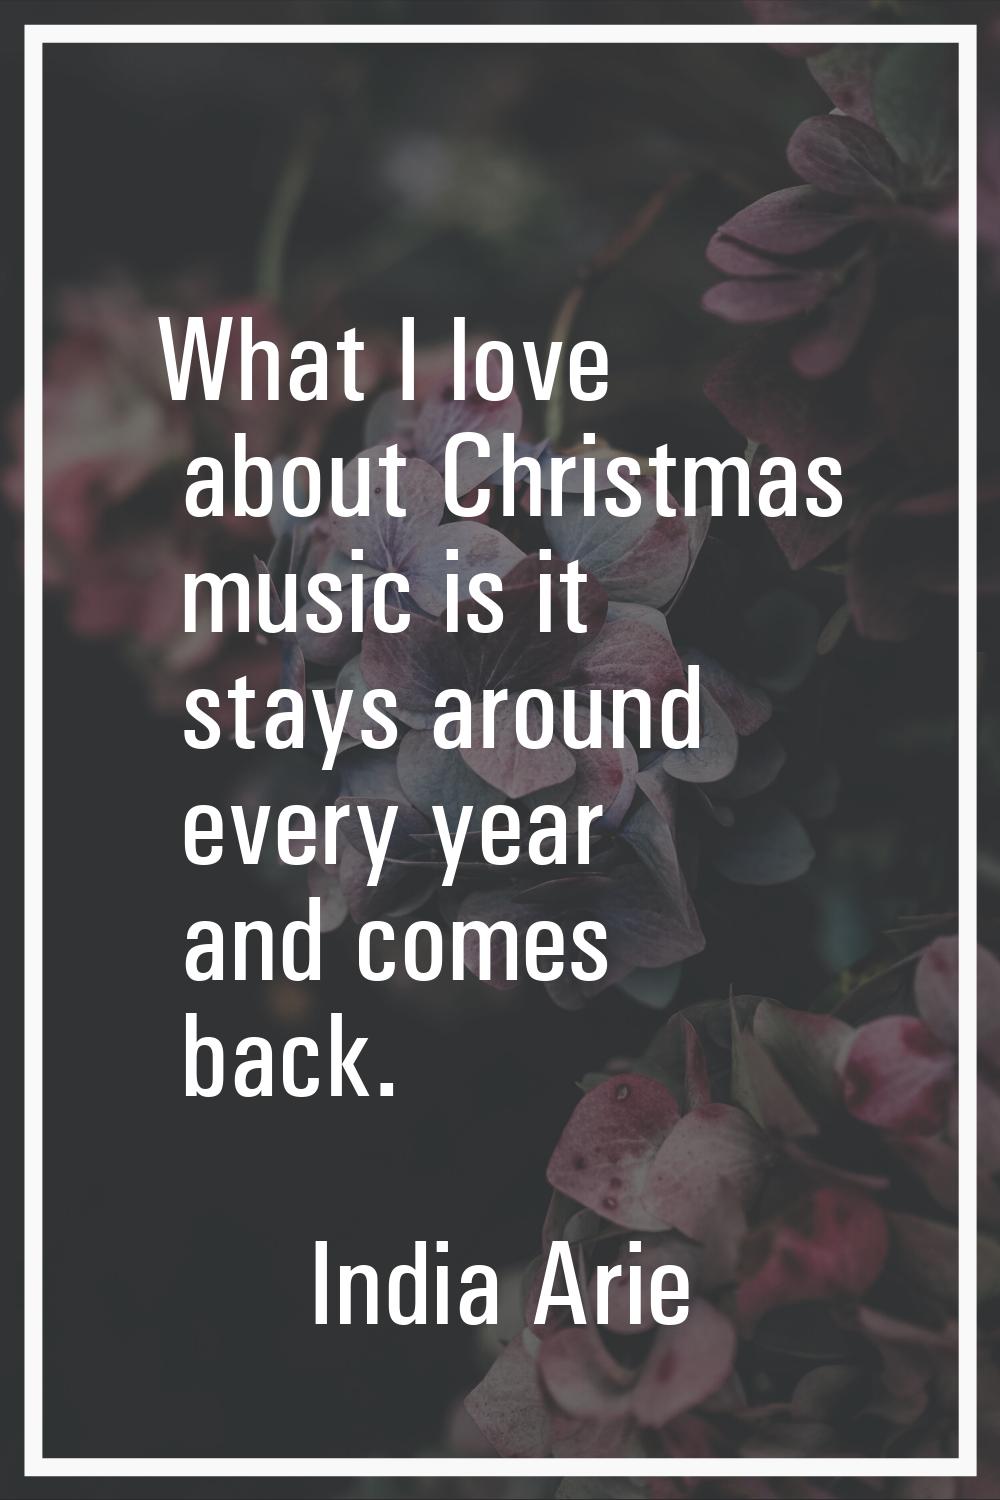 What I love about Christmas music is it stays around every year and comes back.